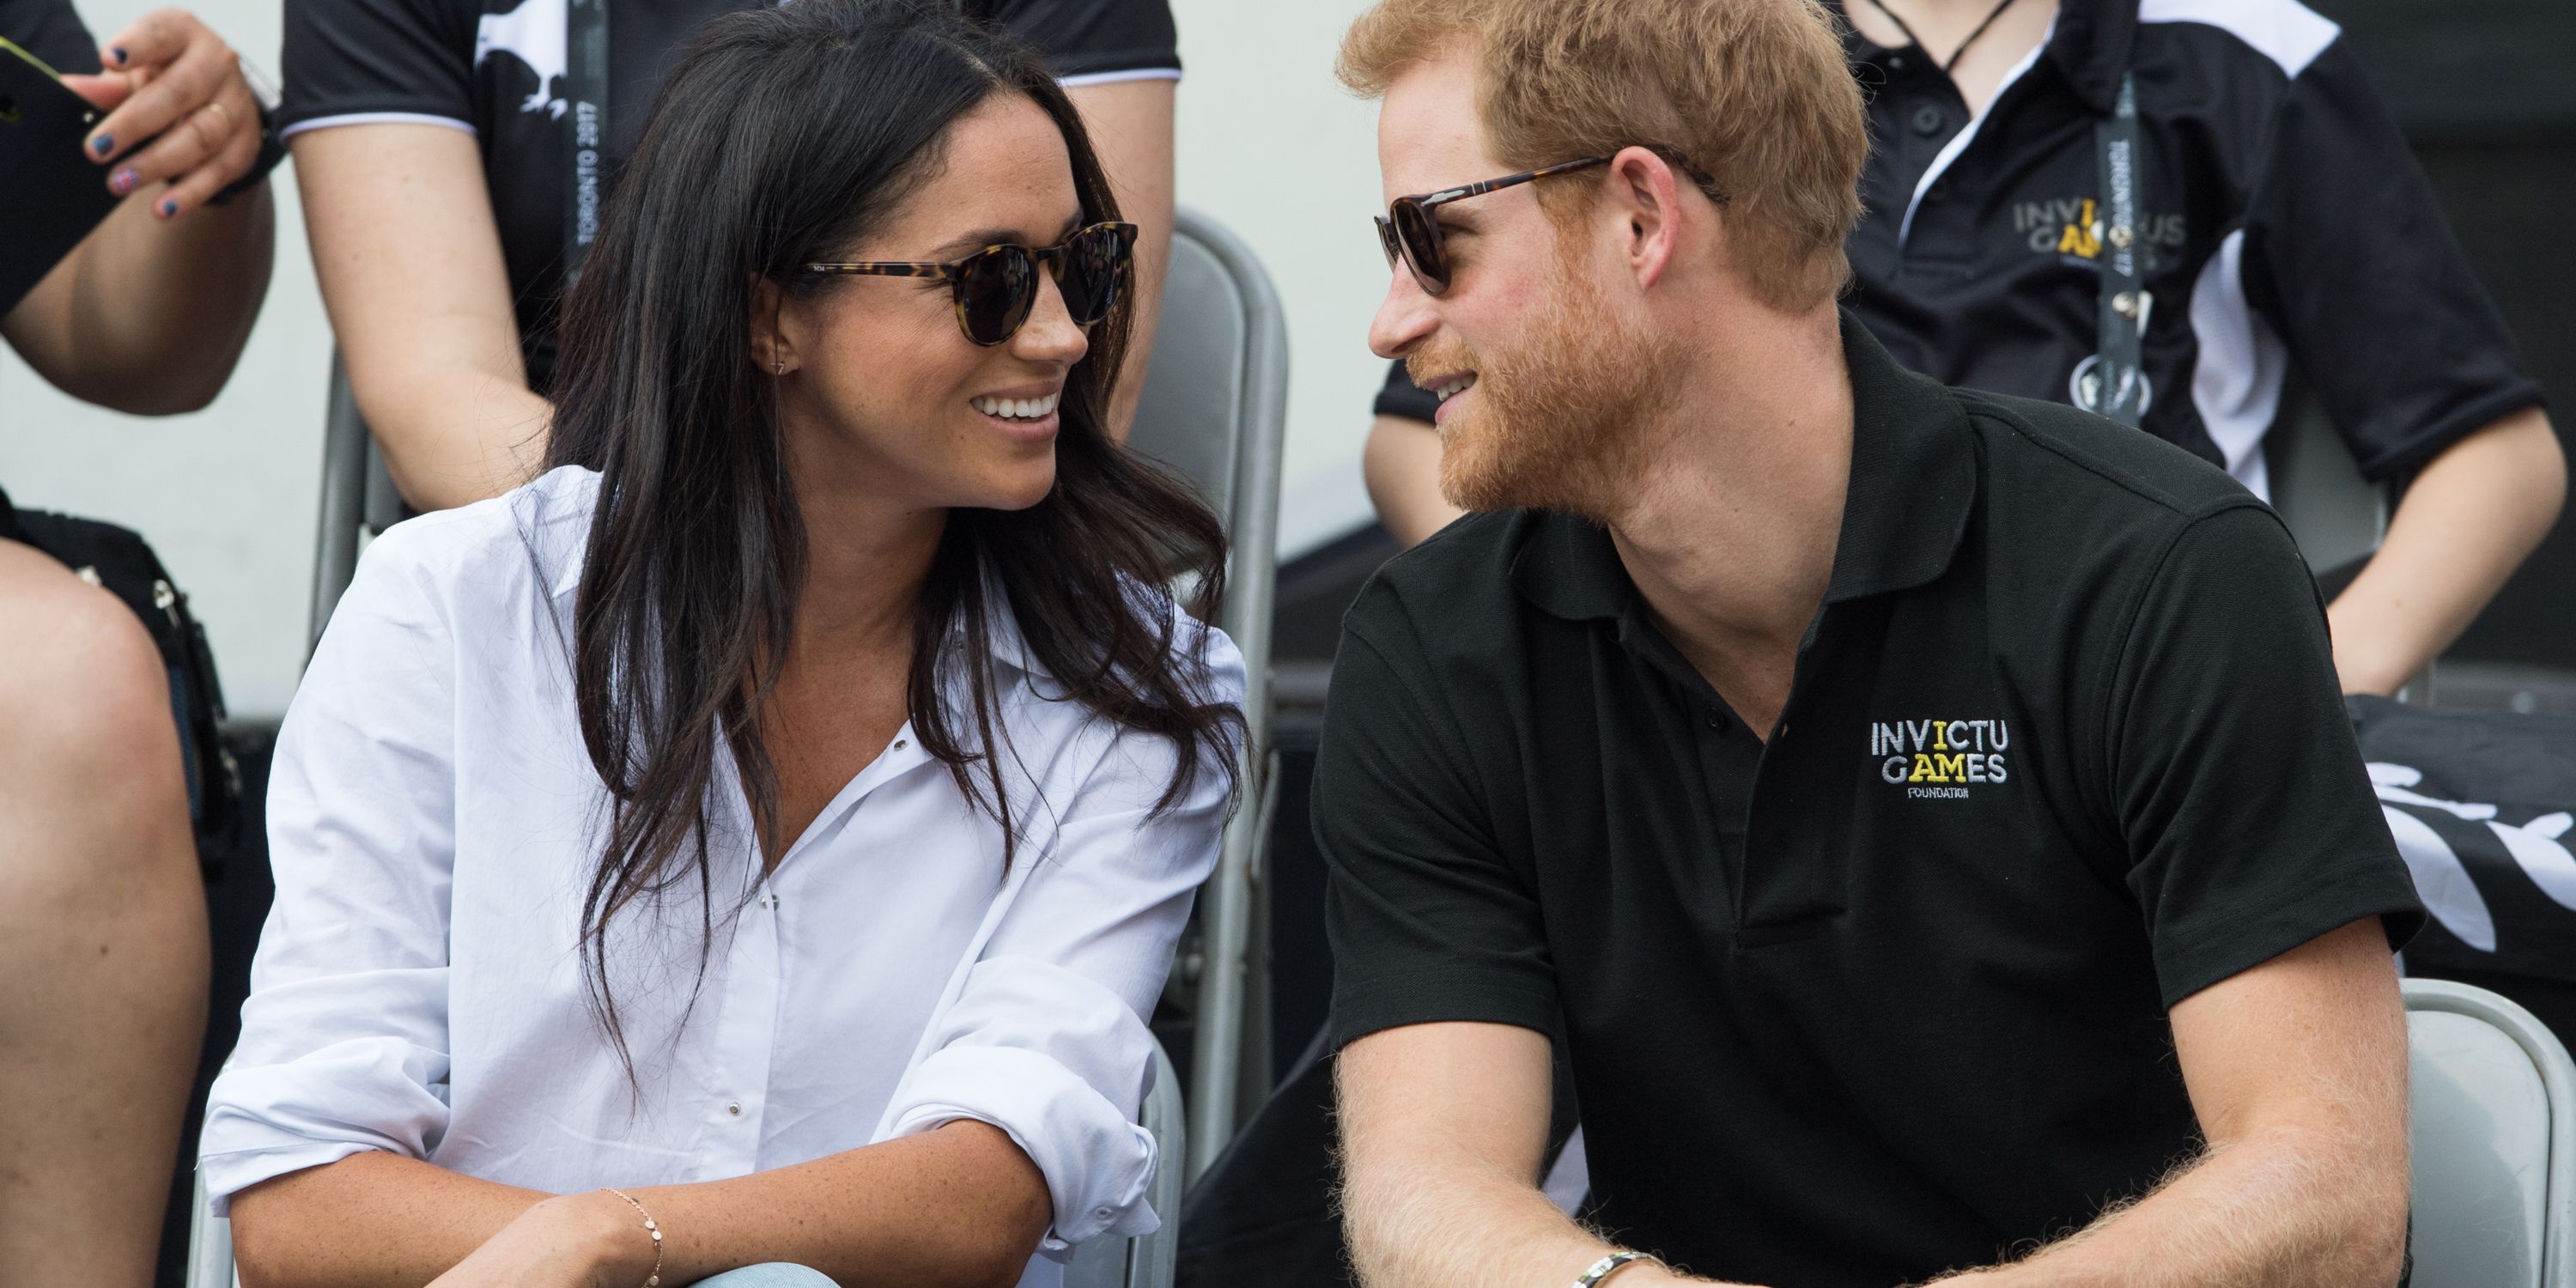 https://hips.hearstapps.com/hmg-prod.s3.amazonaws.com/images/hbz-prince-harry-meghan-markle-cute-moments-gettyimages-853710240-1523378904.jpg?crop=1xw:1xh;center,top